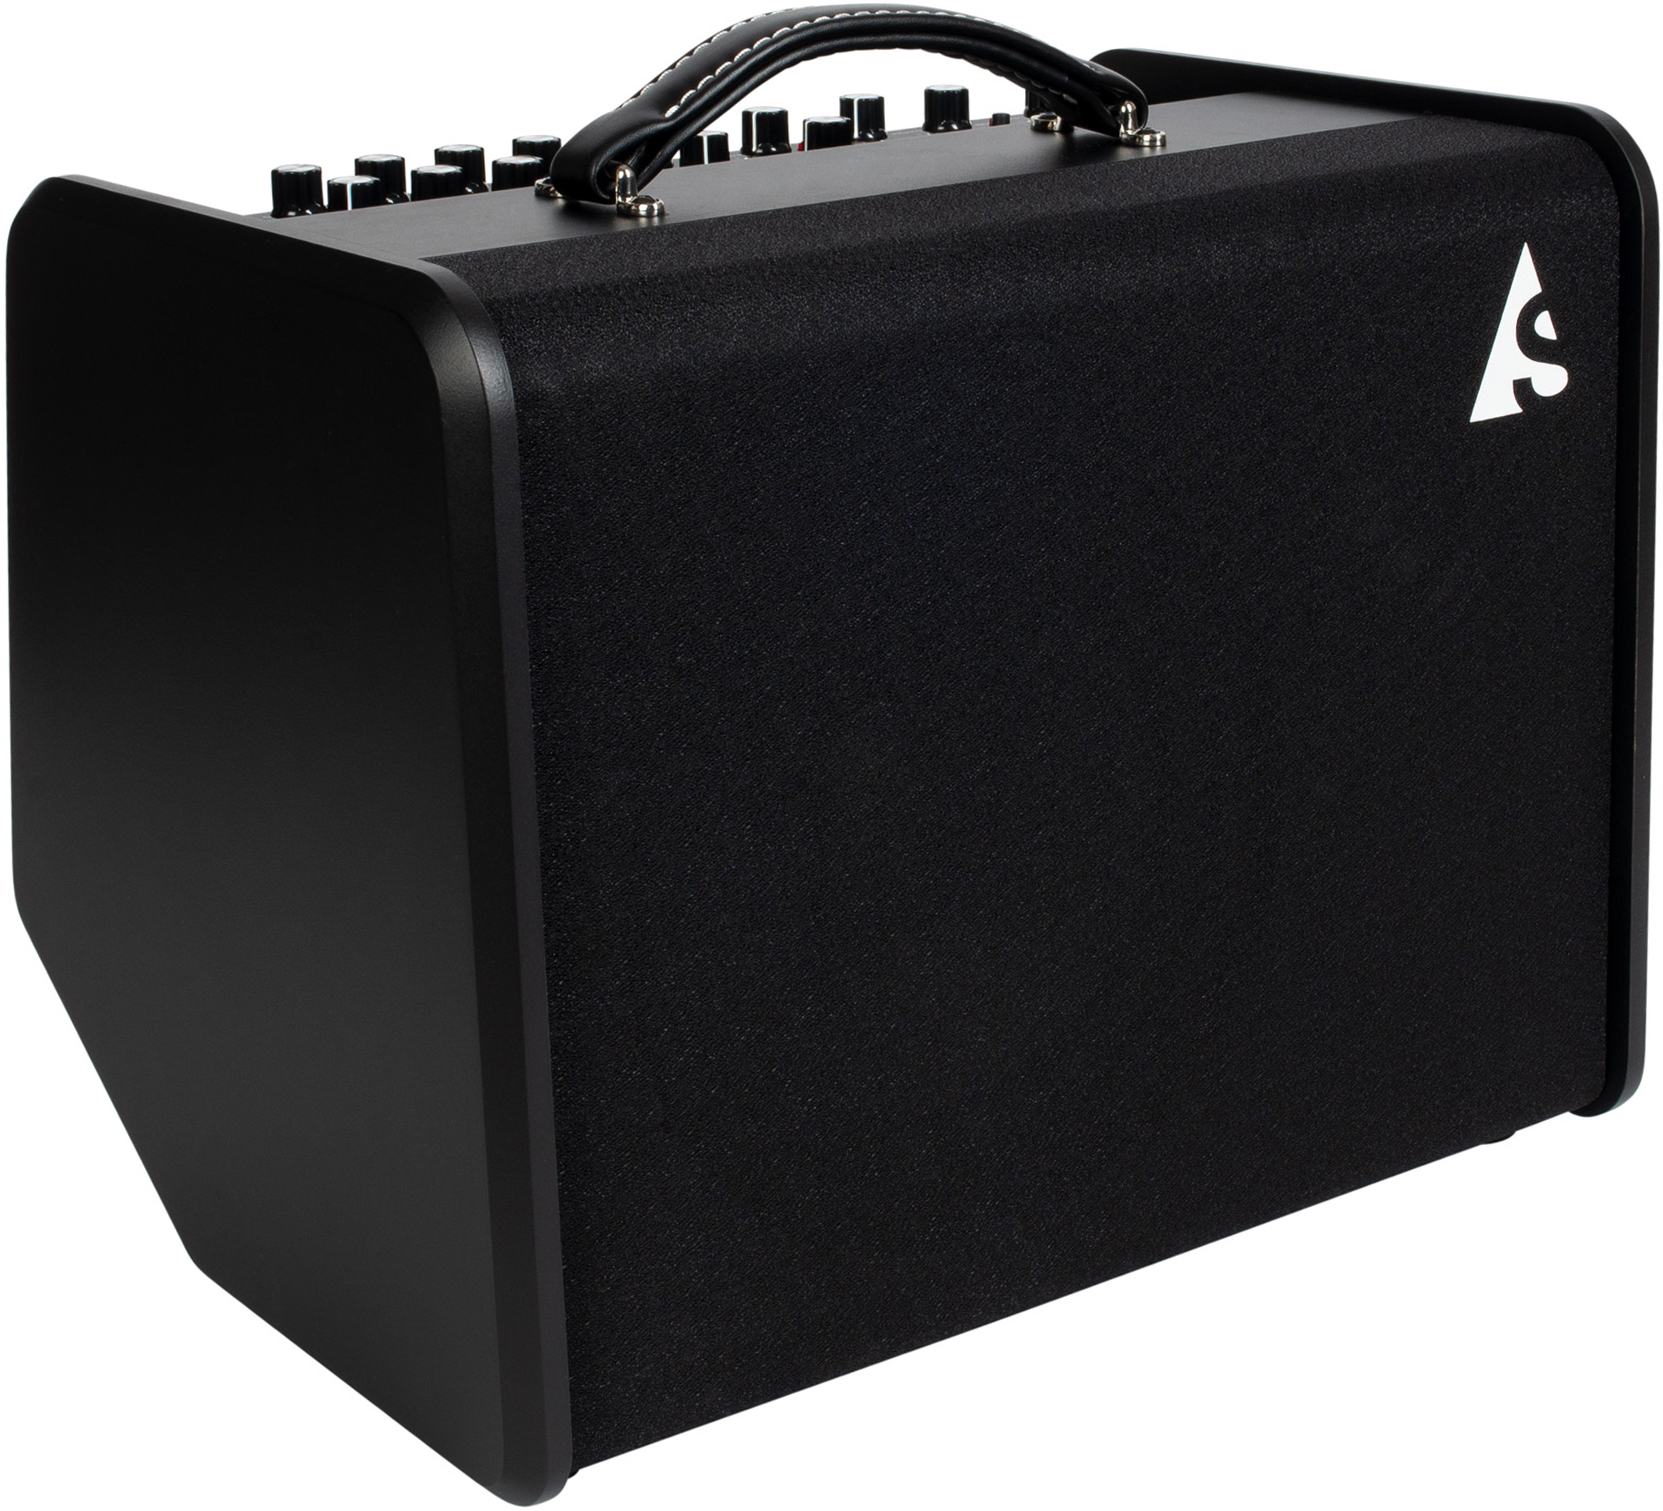 Godin Asg-8 120 Acoustic Solutions 120w 1x8 Black - Acoustic guitar combo amp - Main picture